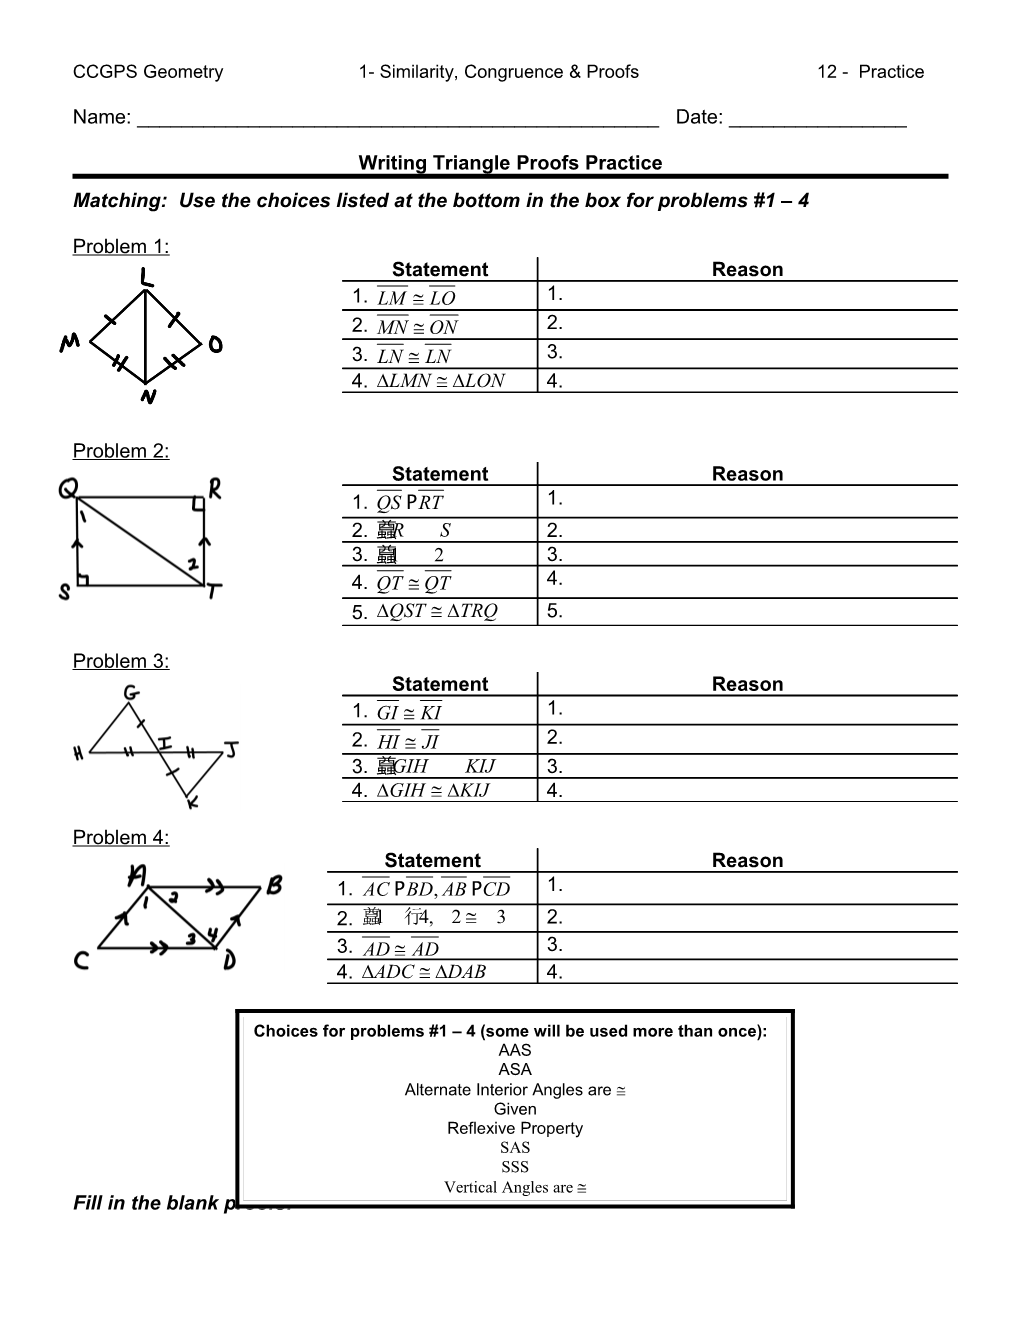 Writing Triangle Proofs Practice